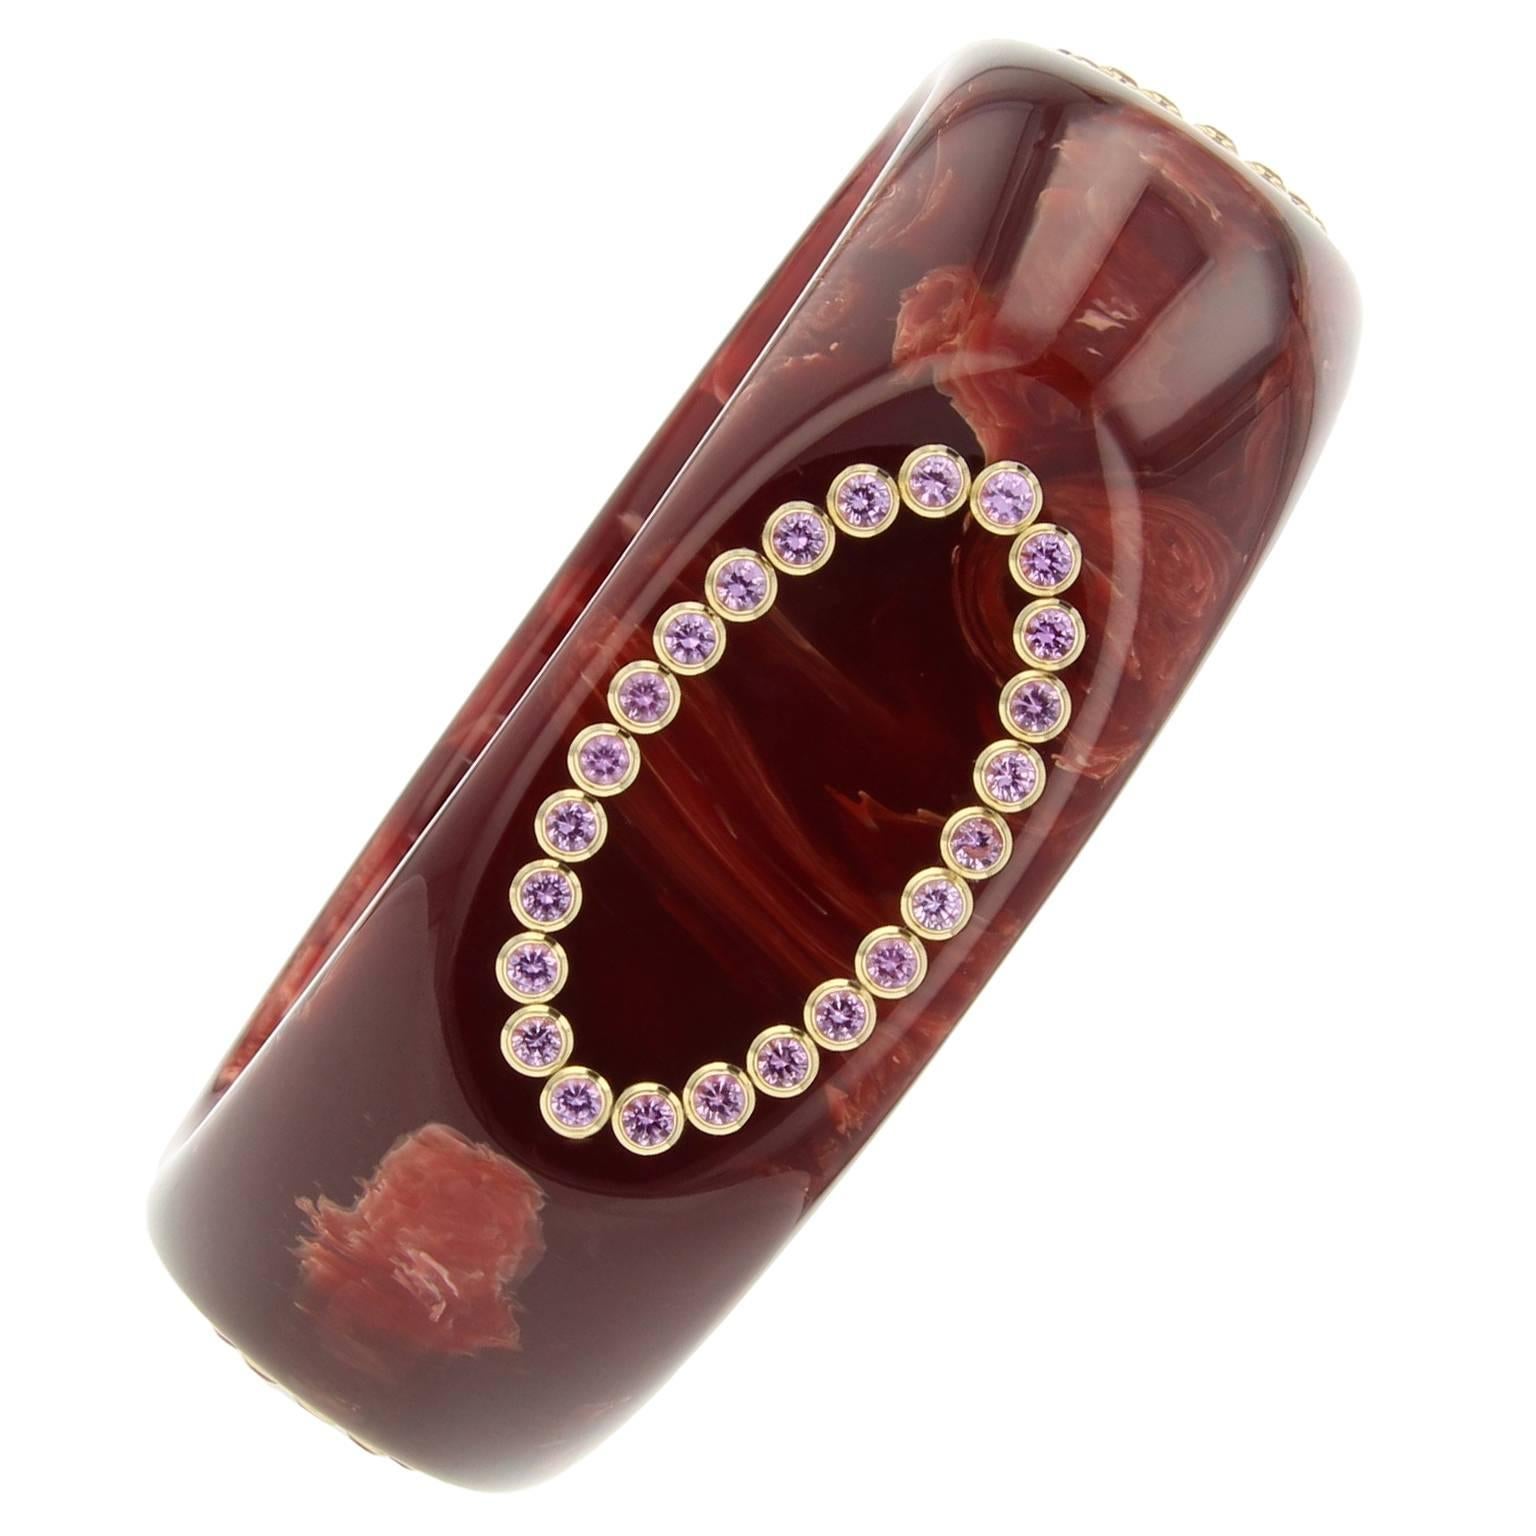 This rounded, square-shaped Mark Davis Bangle was handcrafted using marbled burgundy vintage bakelite.  The applied oval motifs are created using very fine pink sapphires set in 18k yellow gold bezels.  

Full details below: 
• From the Mark Davis